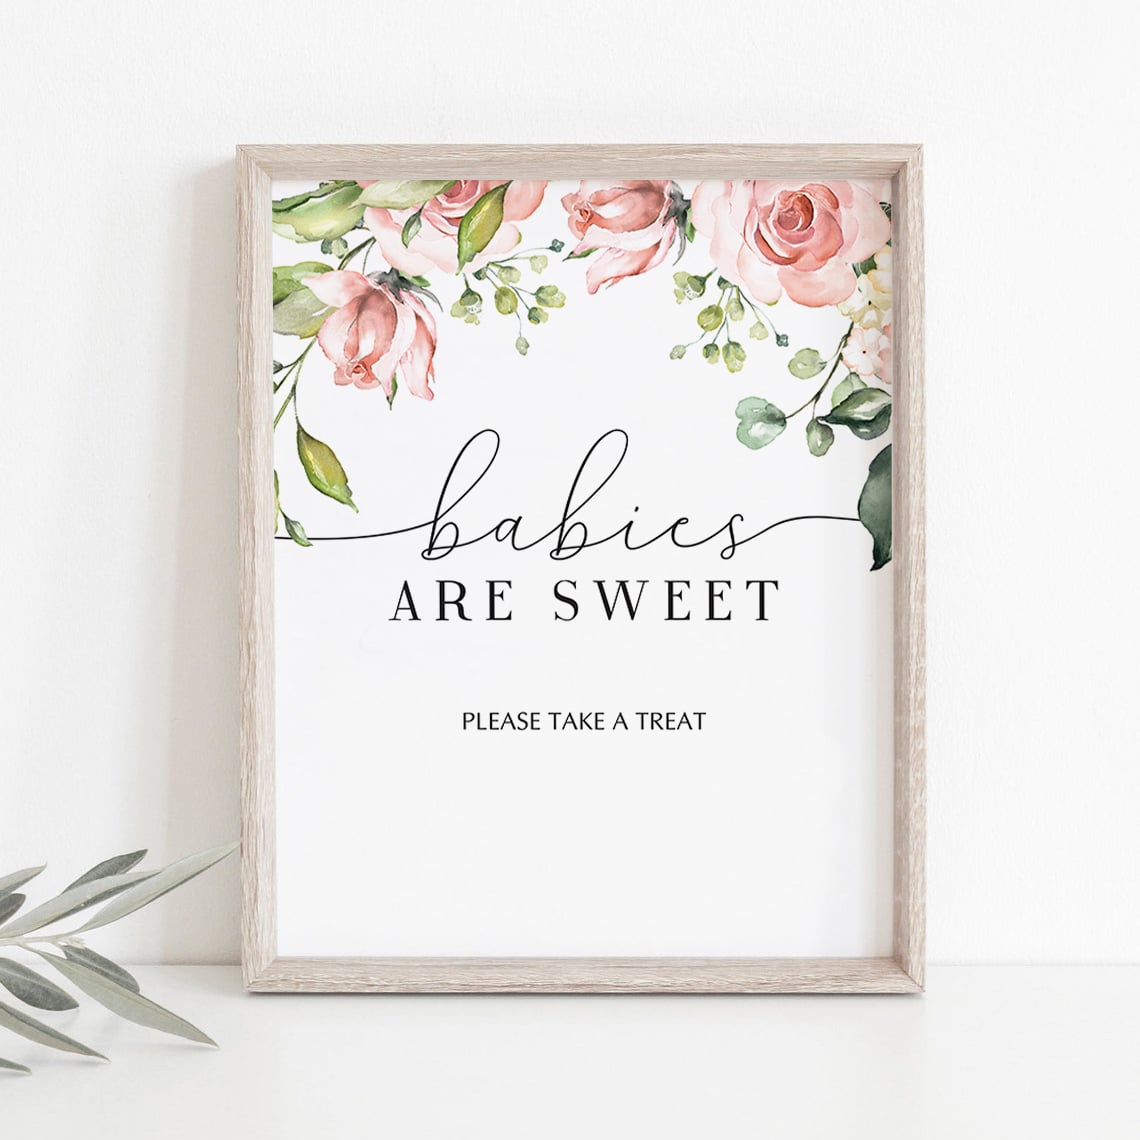 Babies are sweet baby shower sign floral theme by LittleSizzle